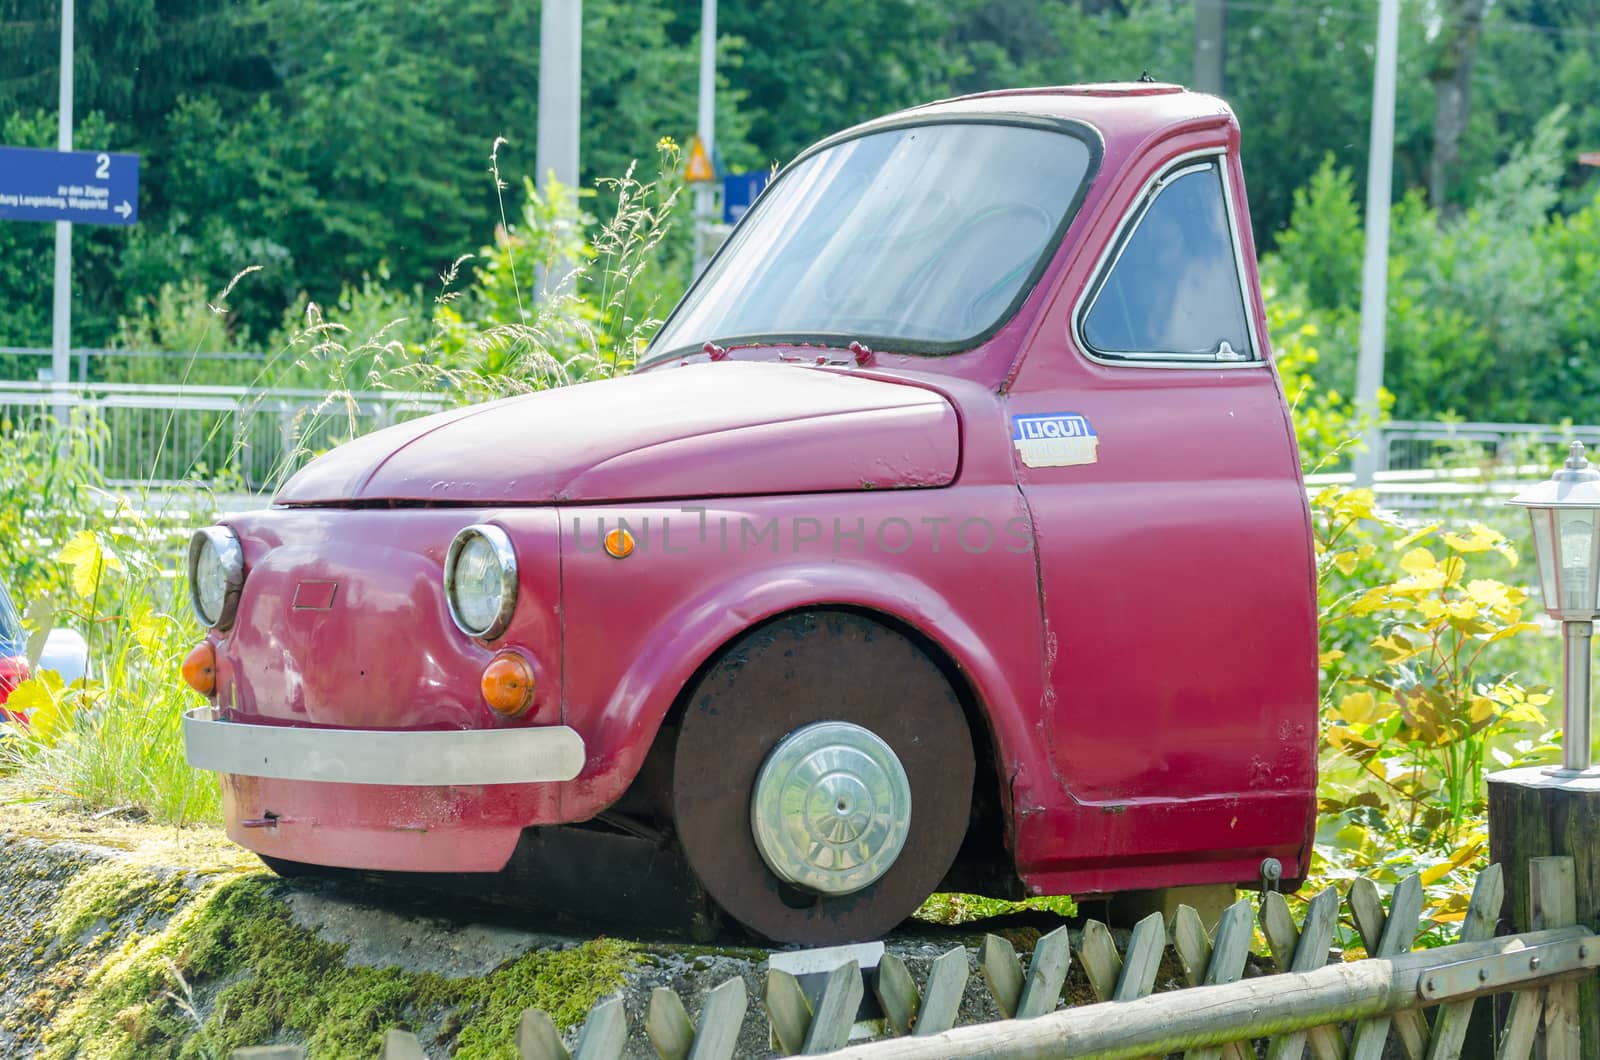 Essen, Nrw, Germany - June 13, 2014: Velber Langenberg district is that half red Fiat 500 car behind the front seats separated.
By overgrown grass. Fiat SpA is an Italian automobile manufacturer, engine manufacturer, financial and industrial group based in Turin in the Piedmont region.